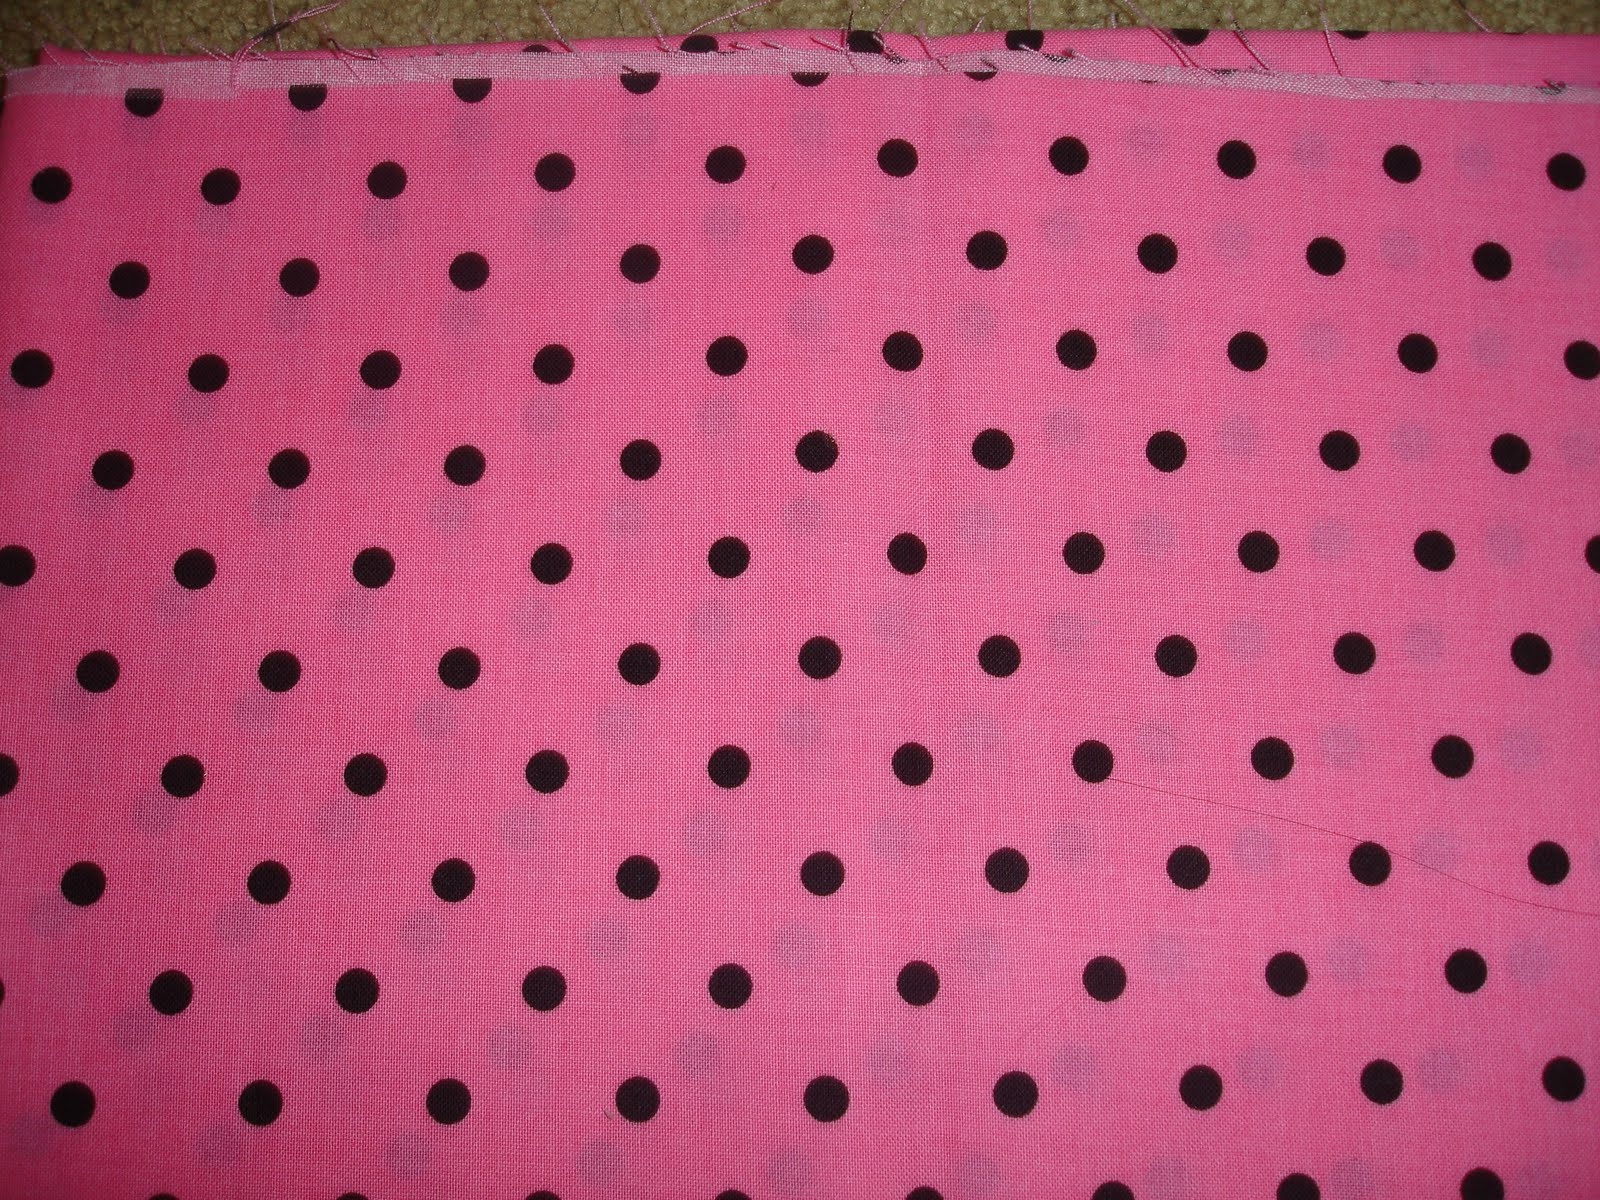 Modest Moma: Pink with Black Polka Dots